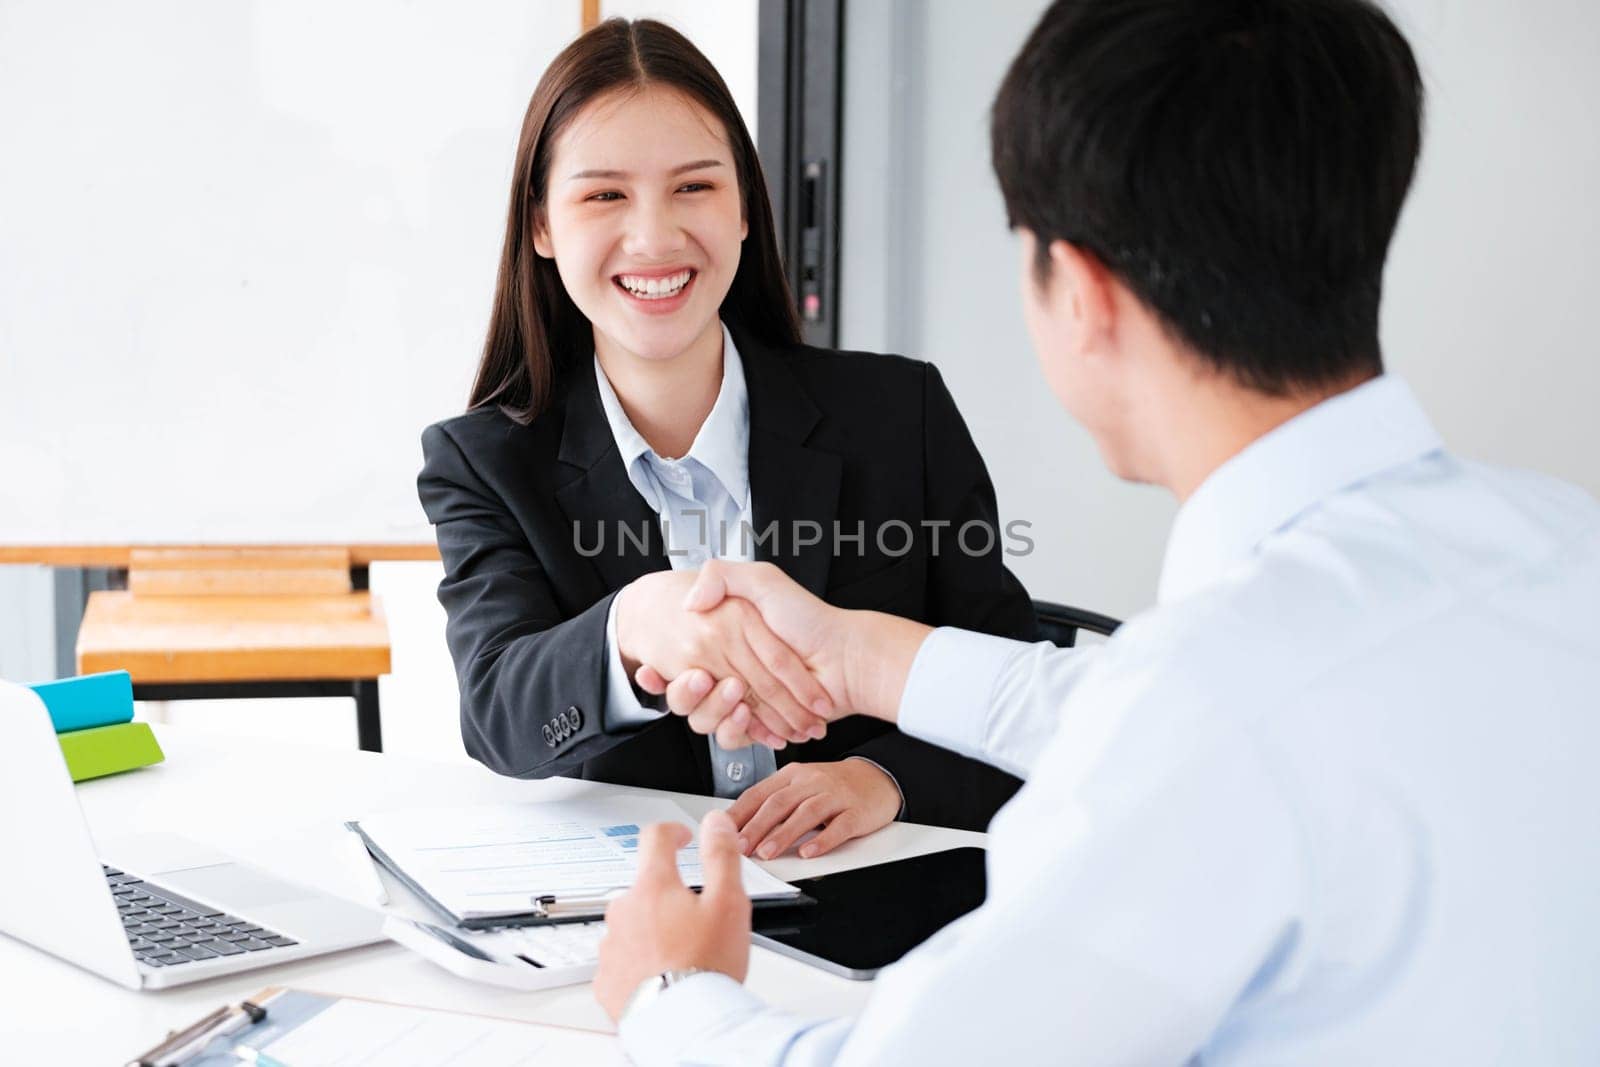 Friendly Handshake at Business Meeting by ijeab